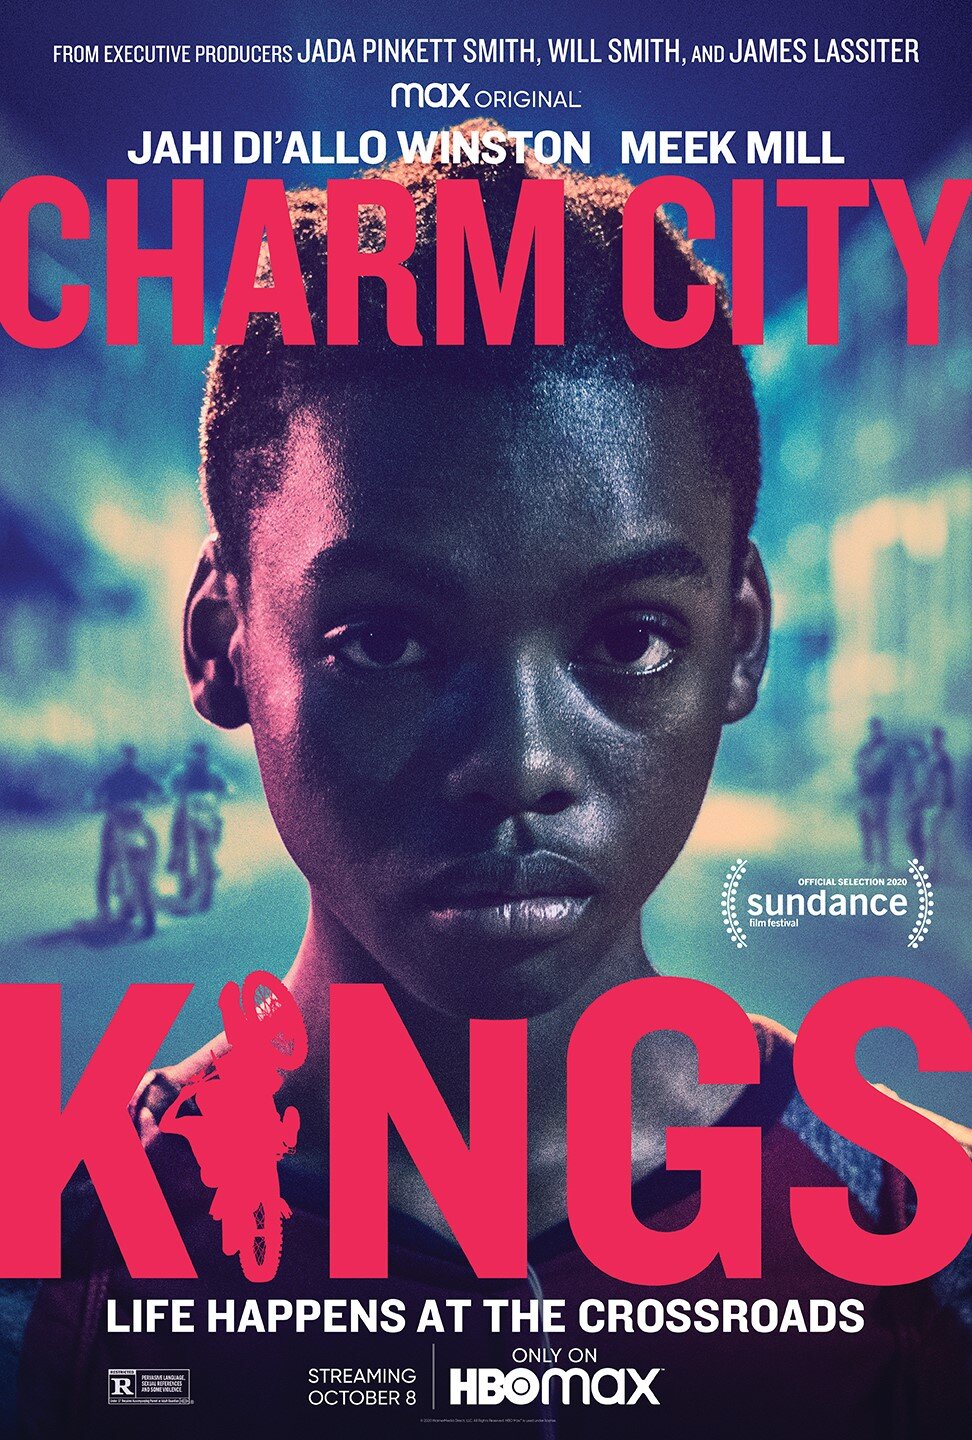 Sony Pictures releases trailer for 'Charm City Kings